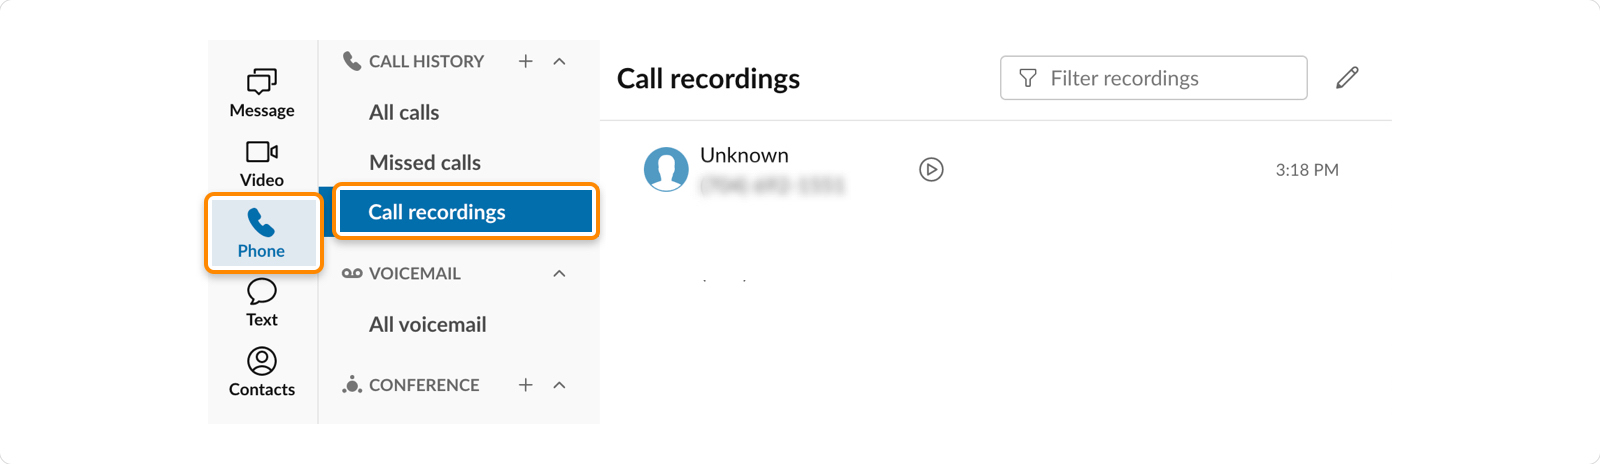 Screen capture of call recordings on the RingCentral desktop app.